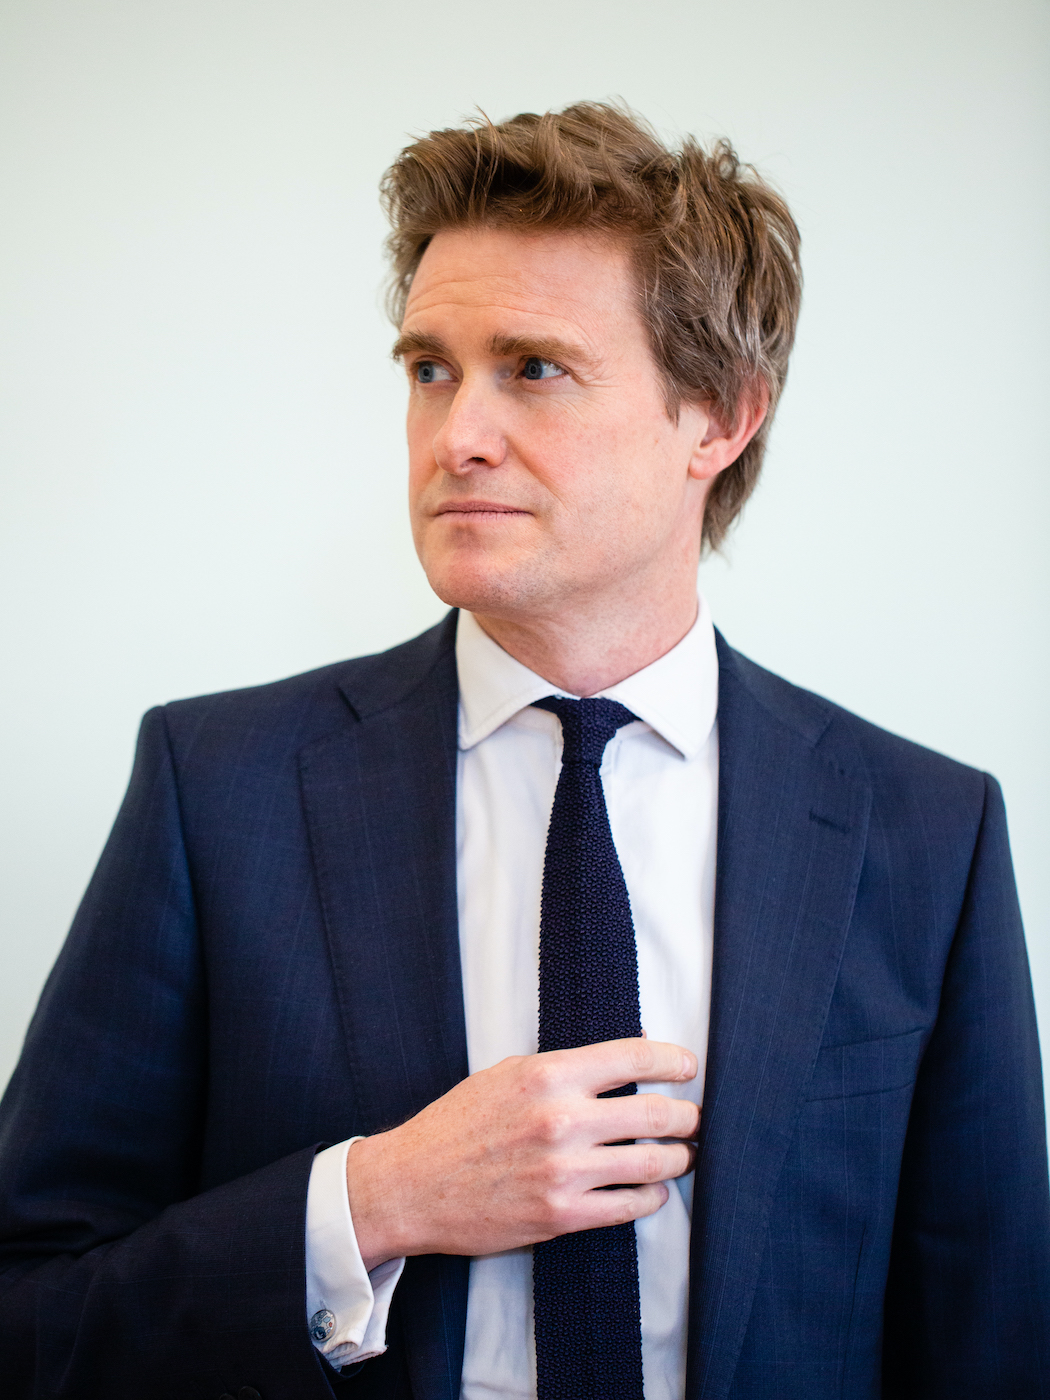 V&A director Tristram Hunt. Photography by Louise Haywood-Schiefer